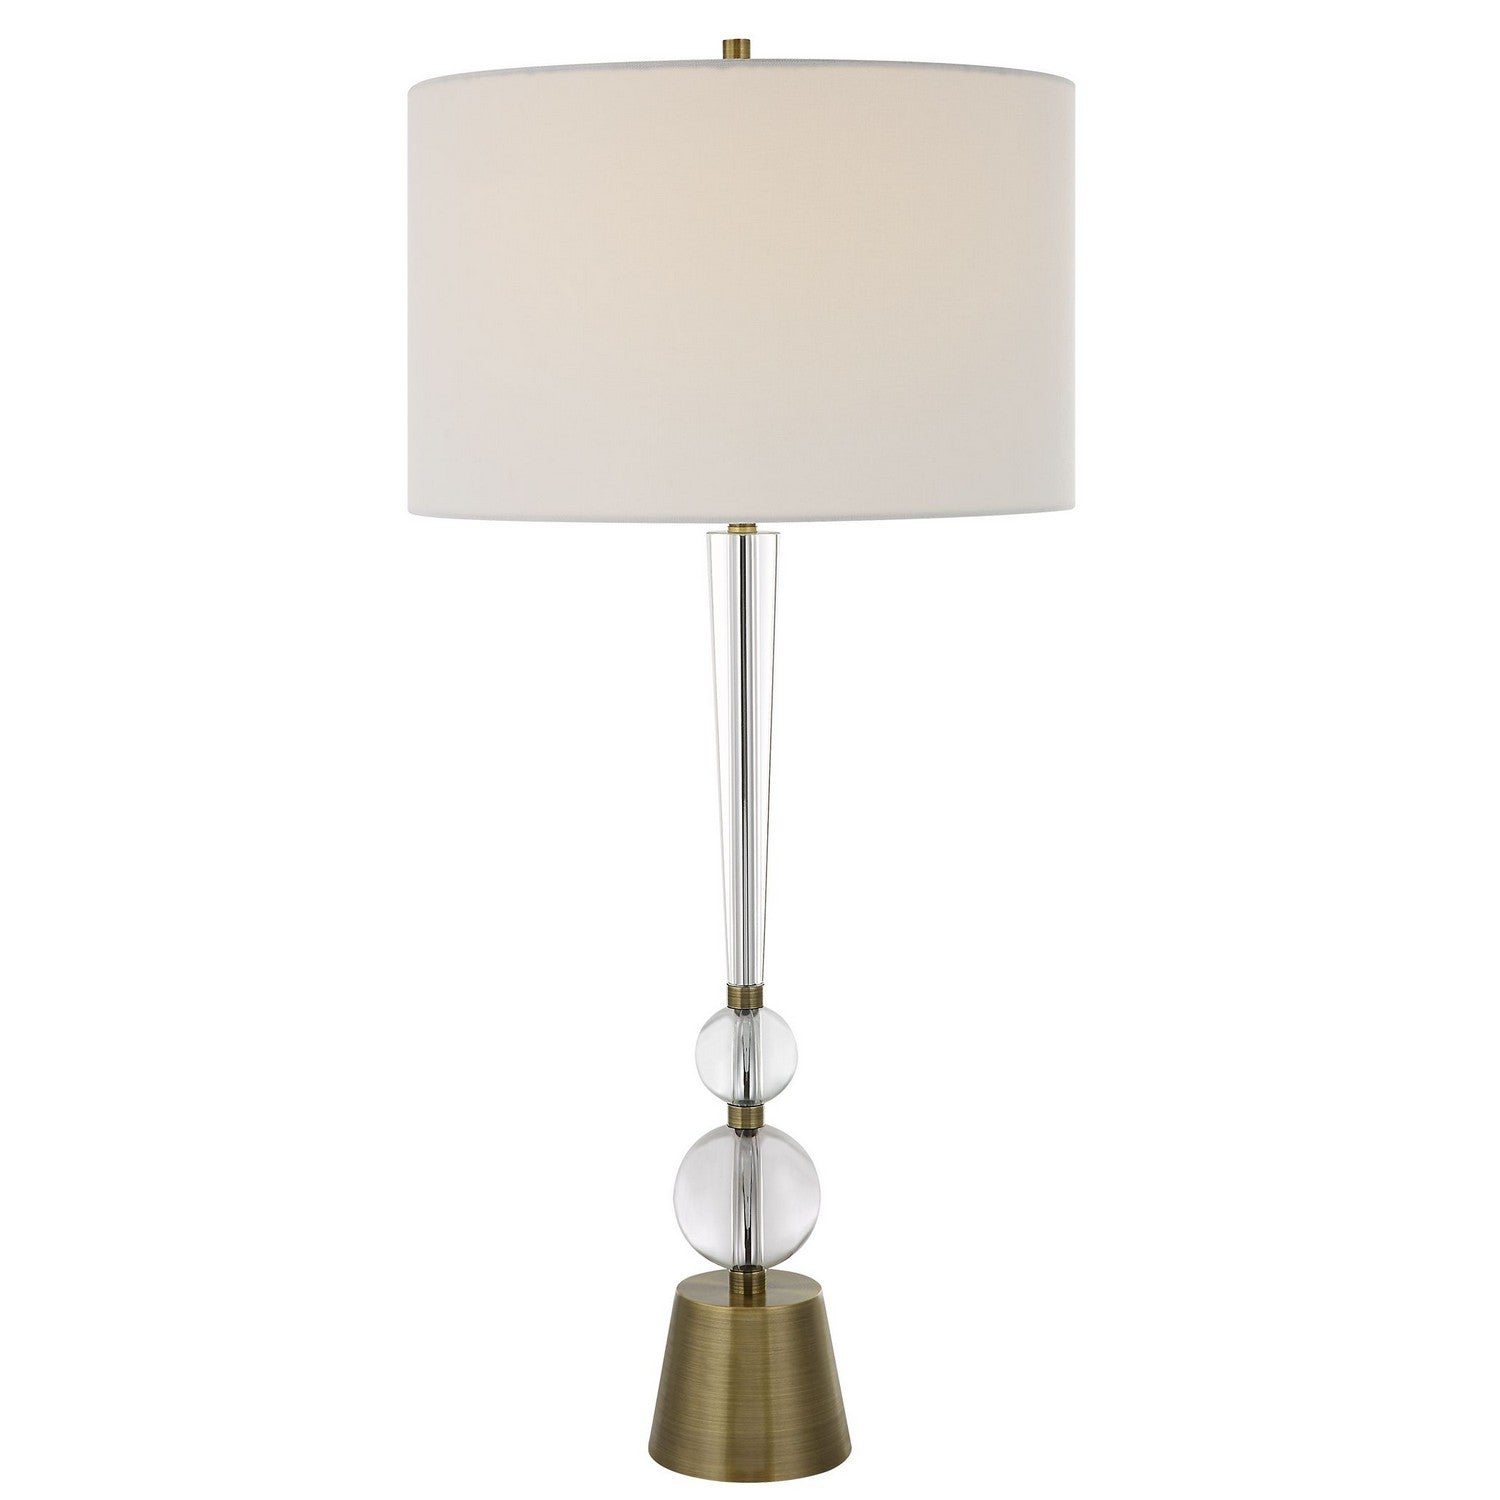 Uttermost - 30233 - One Light Table Lamp - Annily - Antiqued Brass